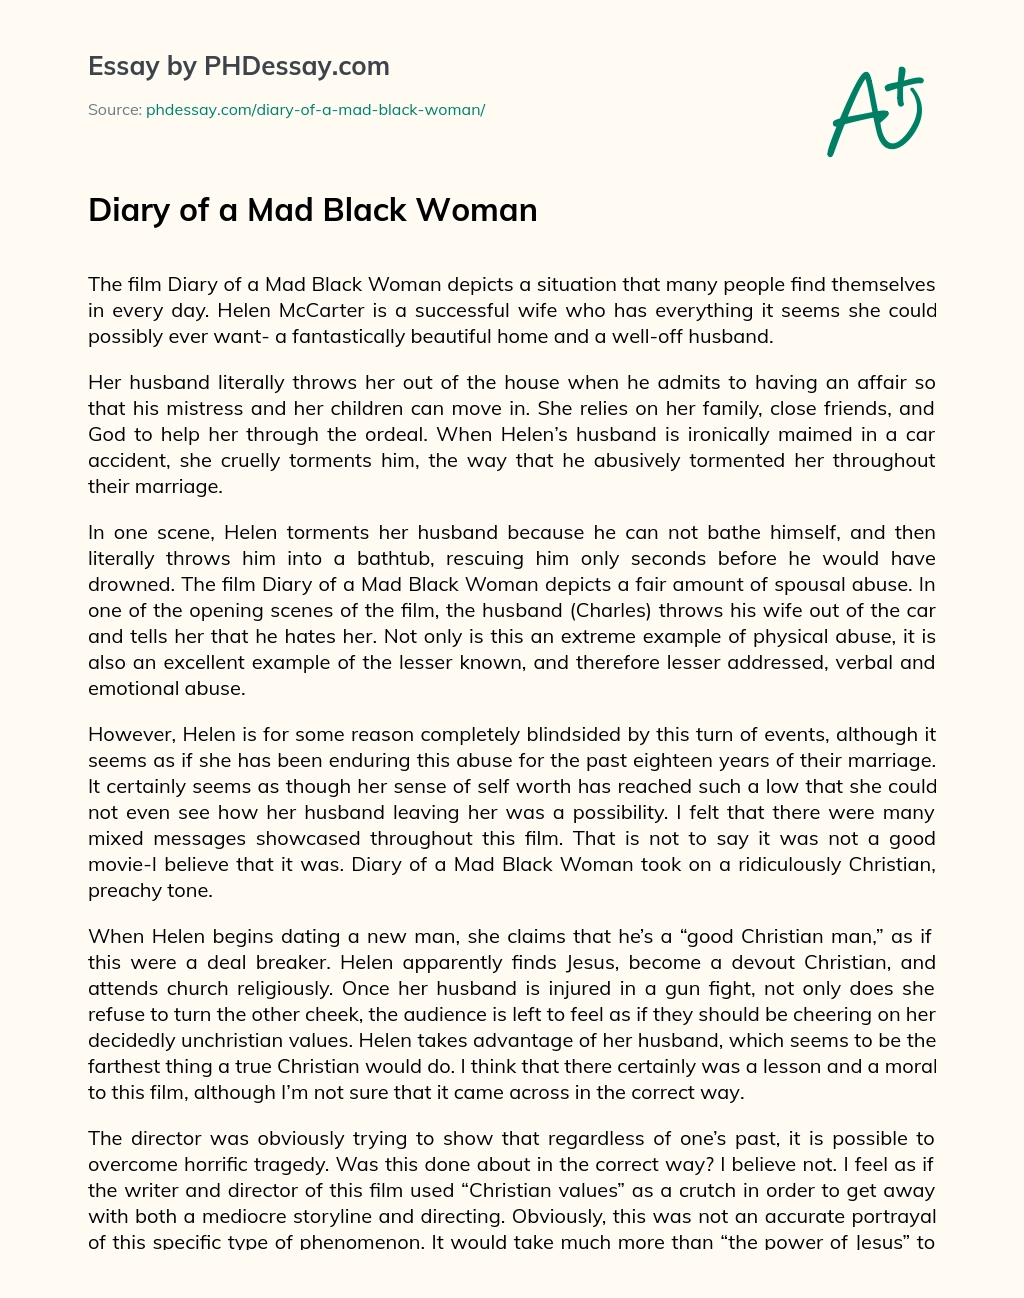 Diary of a Mad Black Woman essay